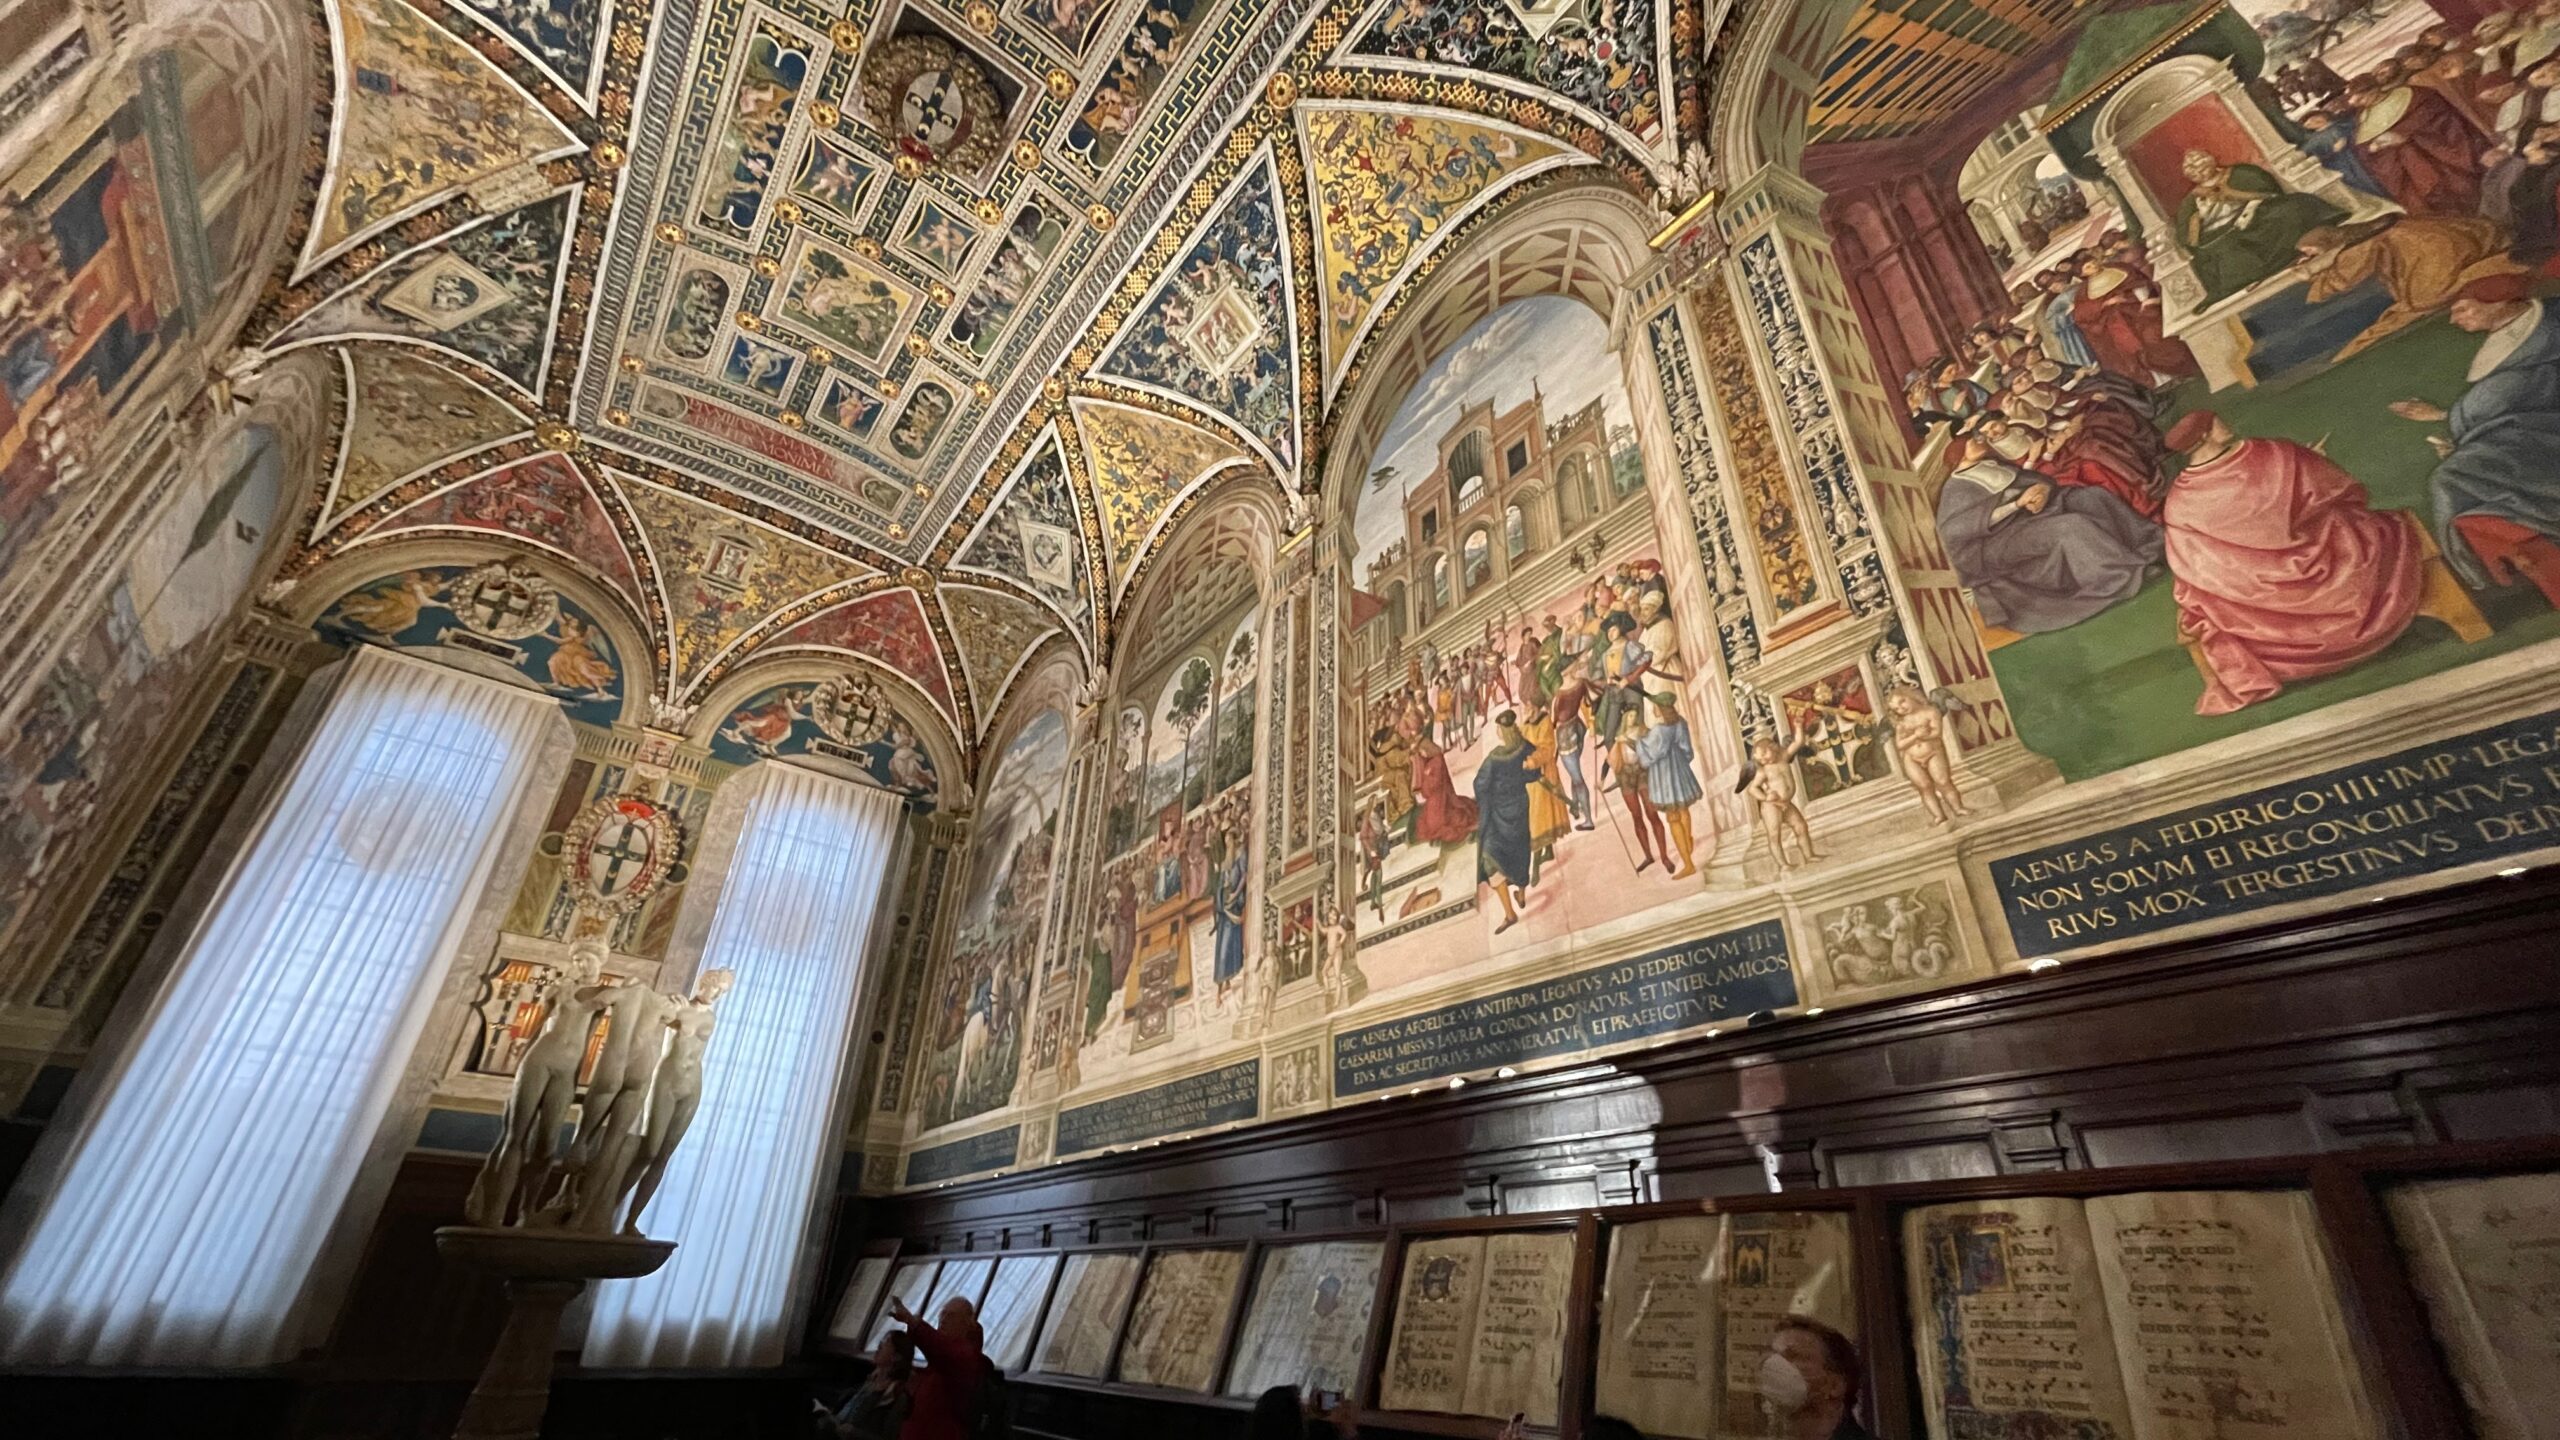 Travel Talk Tuesday: August 2, 2022 – Inside The Duomo of Siena  (S2E24)